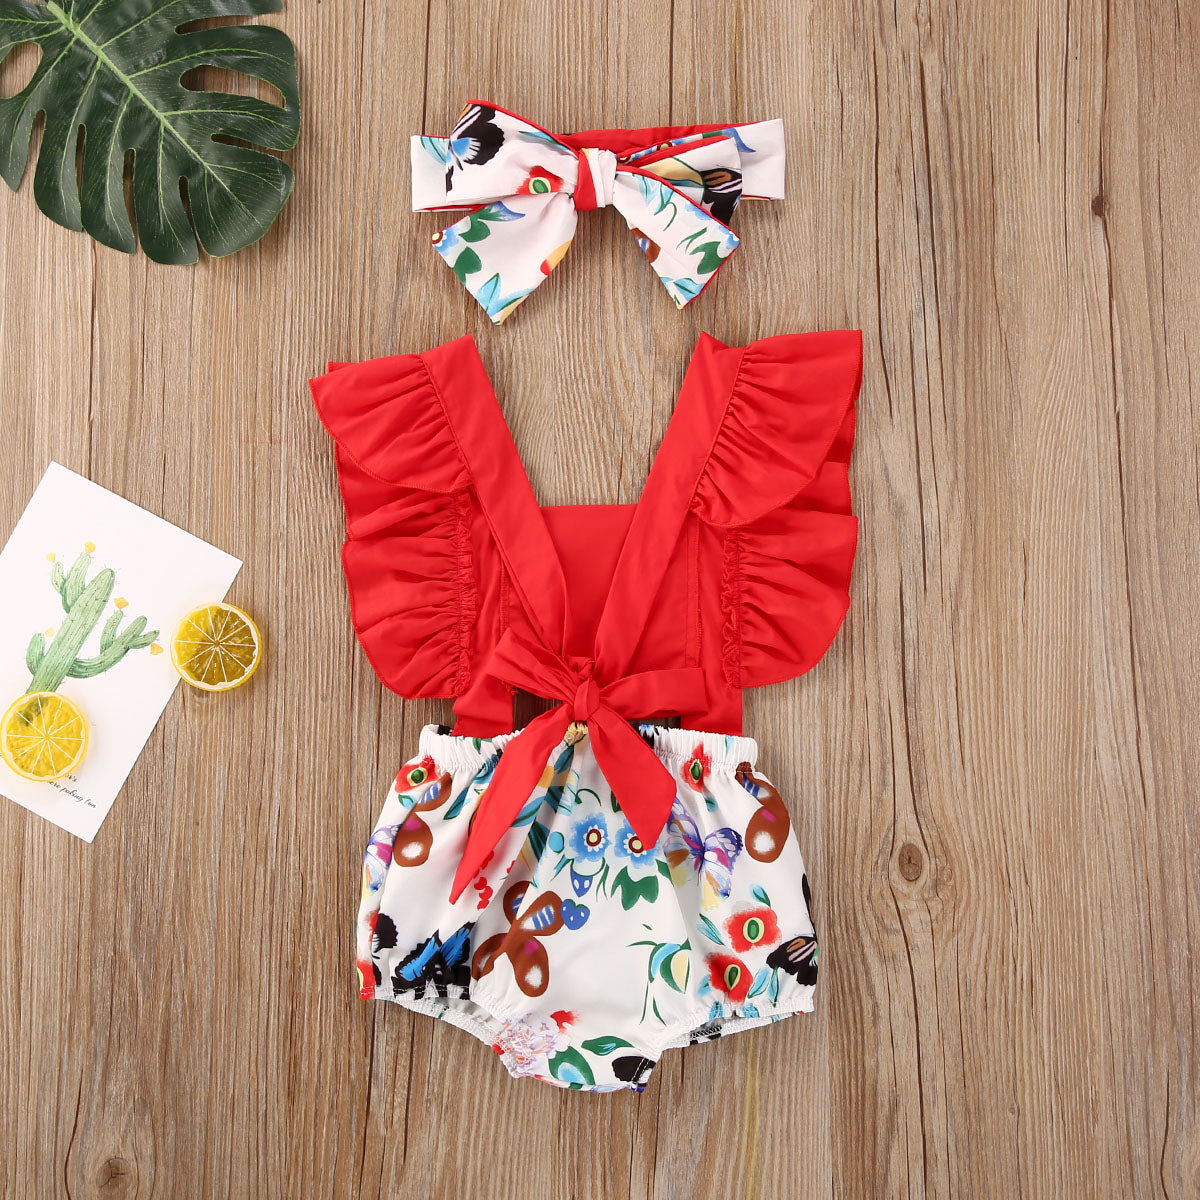 Summertime Romper + Bow Sets | Sleeveless Girls' Outfit itsykitschycoo